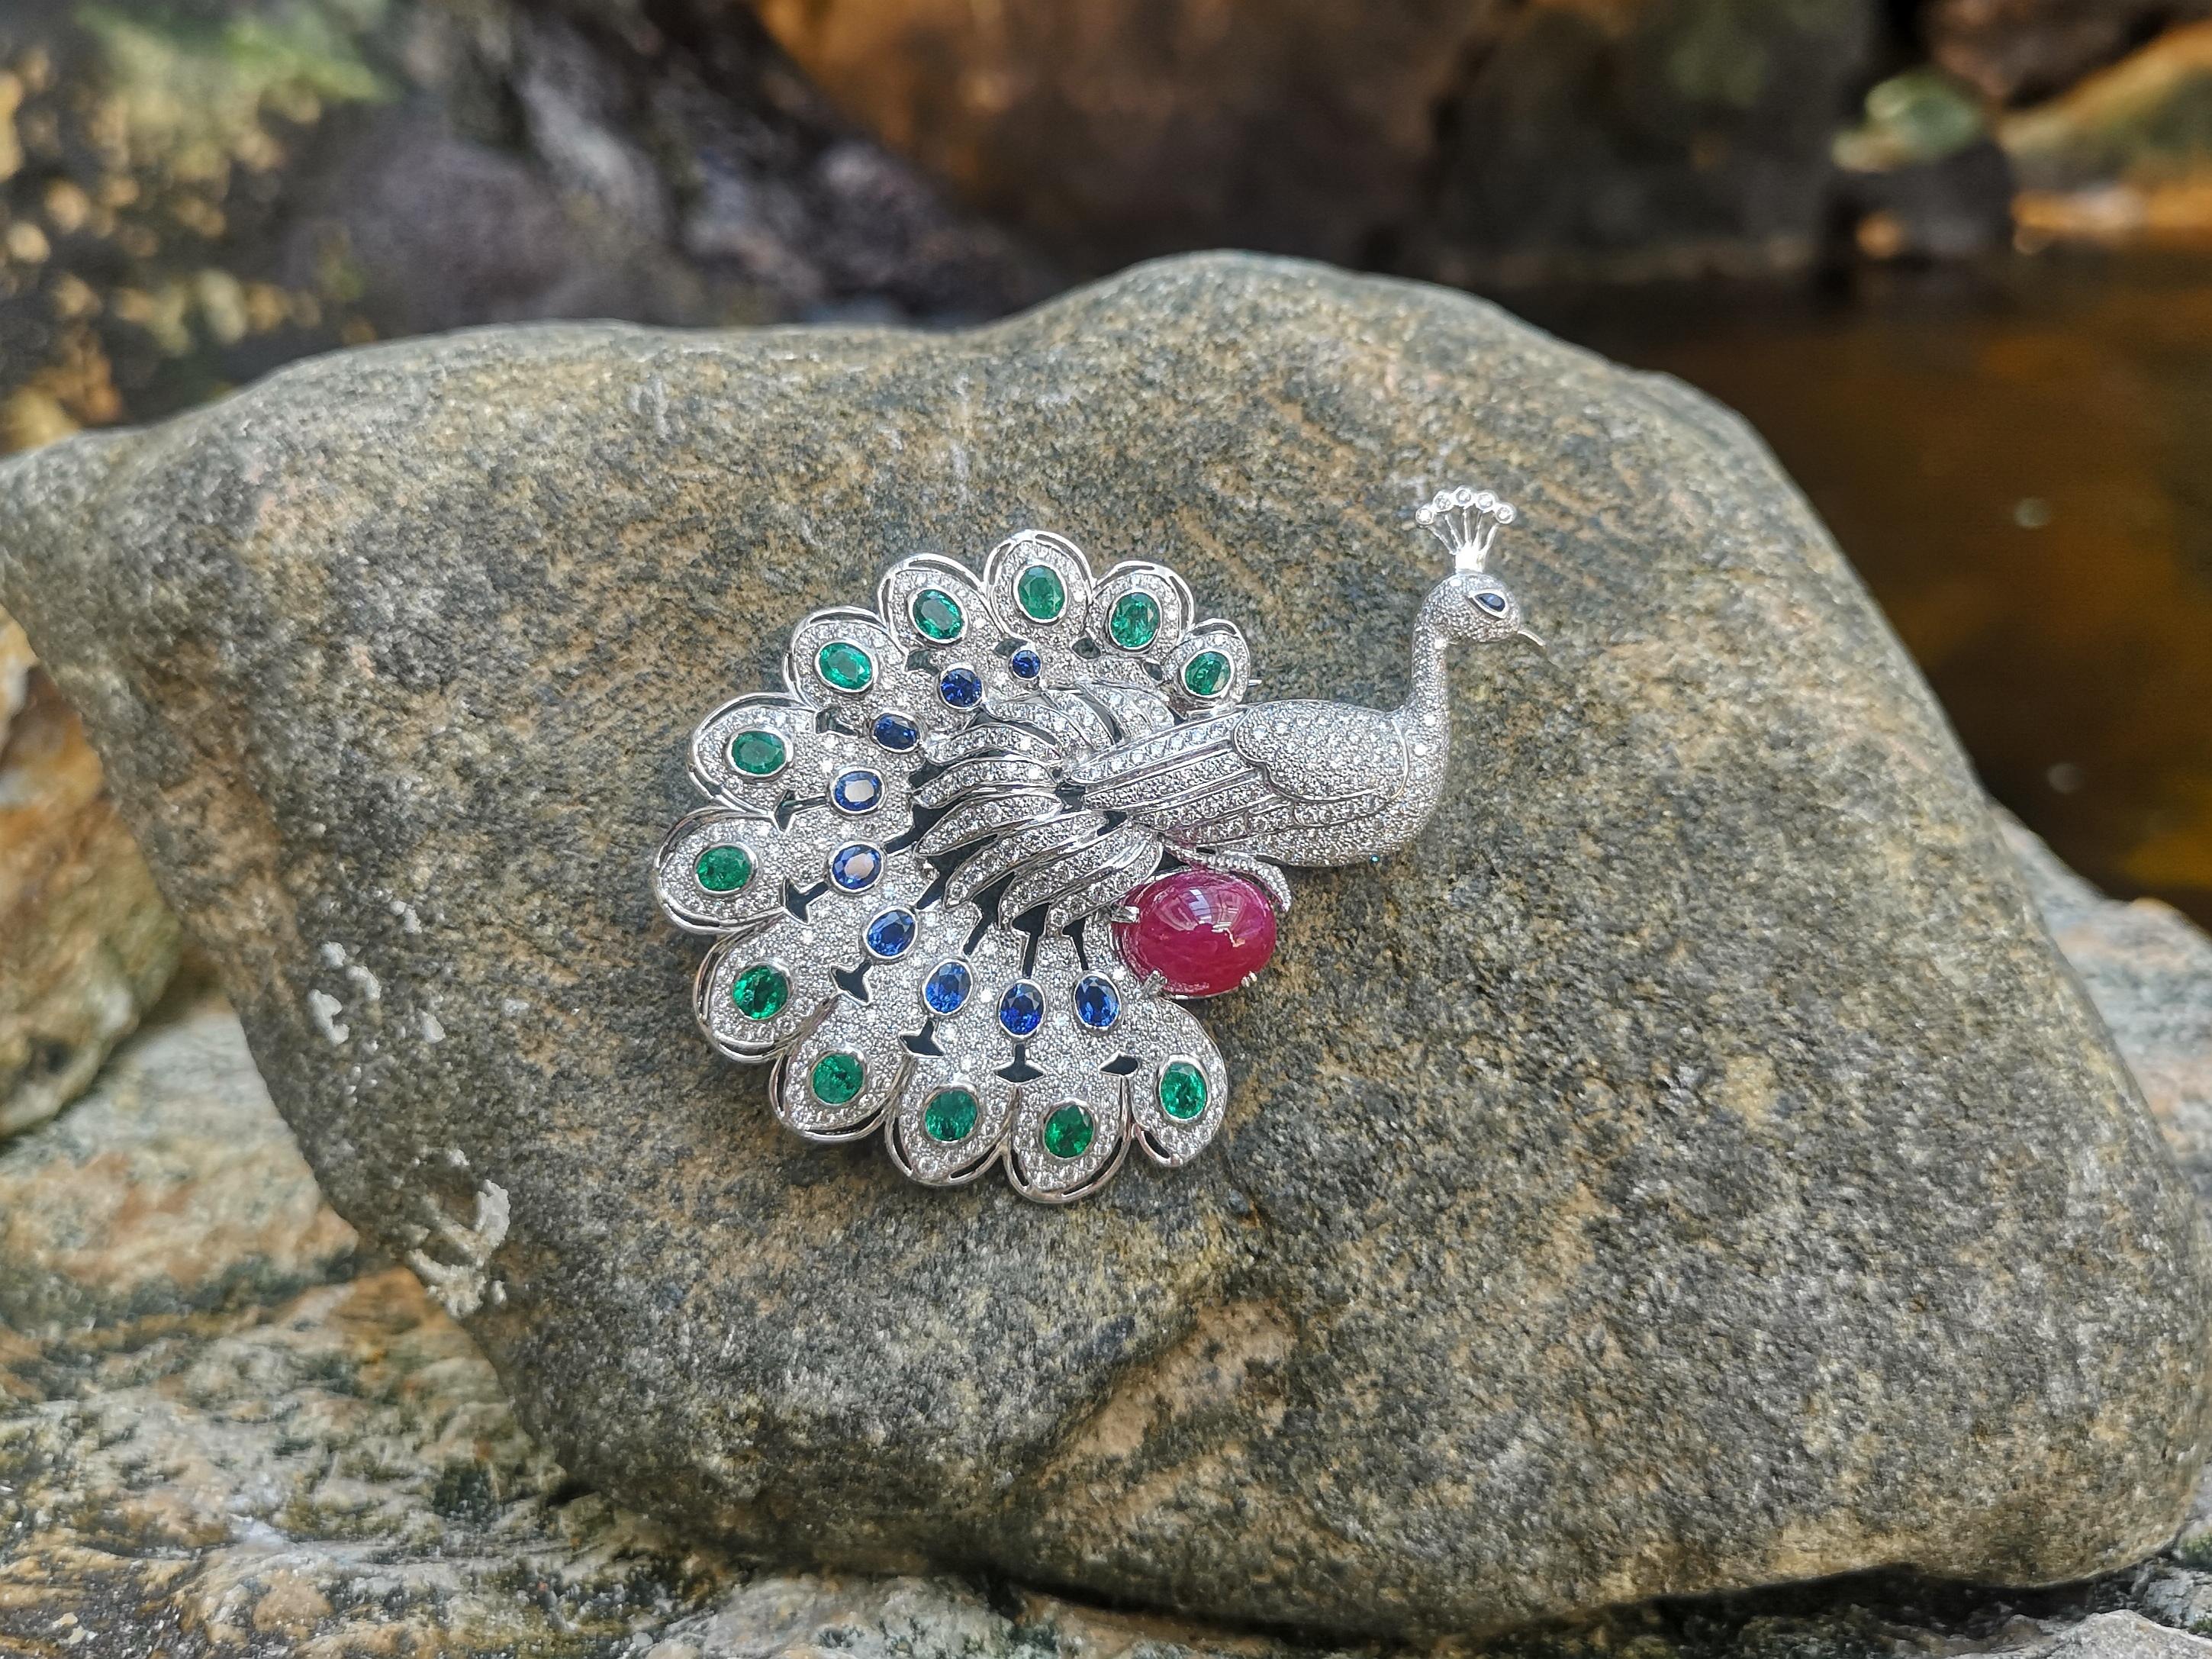 Emerald 3.79 carats, Cabochon Ruby 8.62 carats, Blue Sapphire 2.97 carats and Diamond 4.51 carats Brooch set in 18 Karat White Gold Settings

Width:  5.5 cm 
Length: 7.5 cm
Total Weight: 31.83 grams

